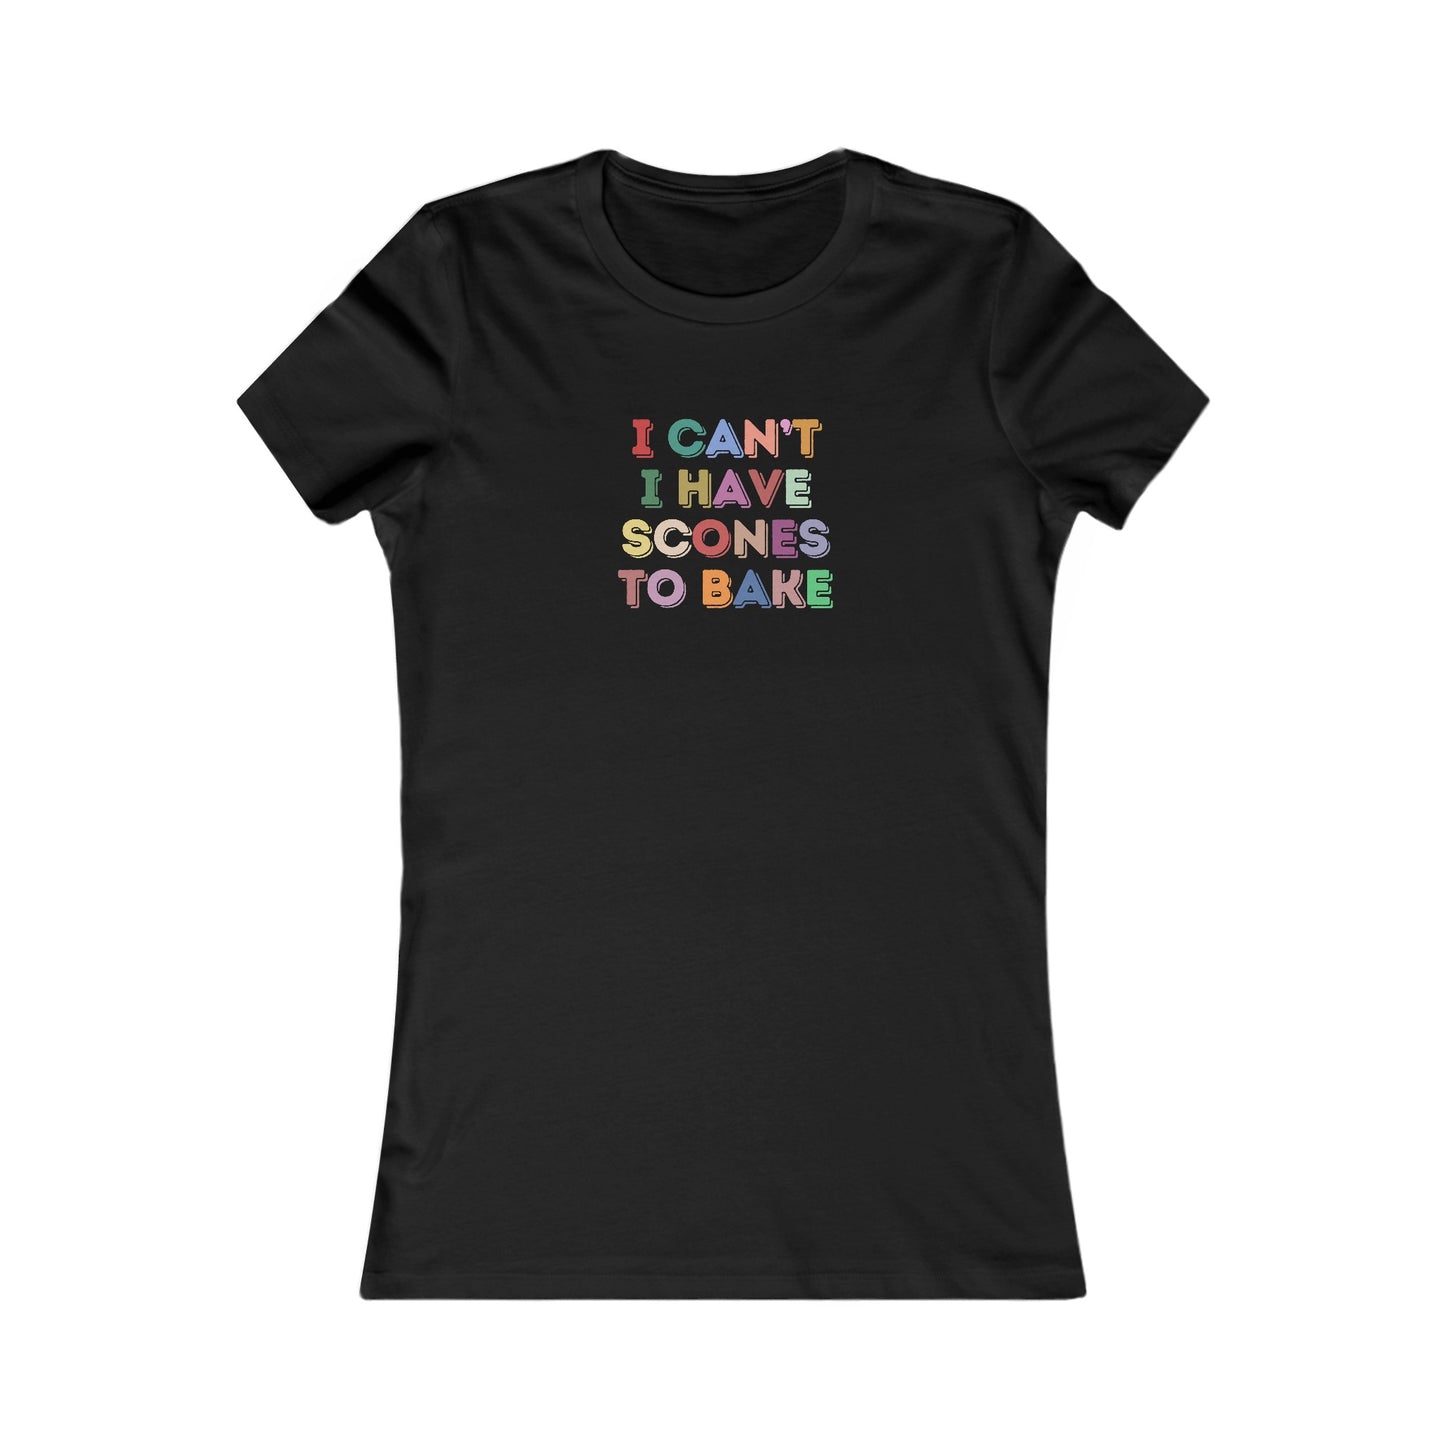 I Can't I Have Scones to Bake Women's T-Shirt